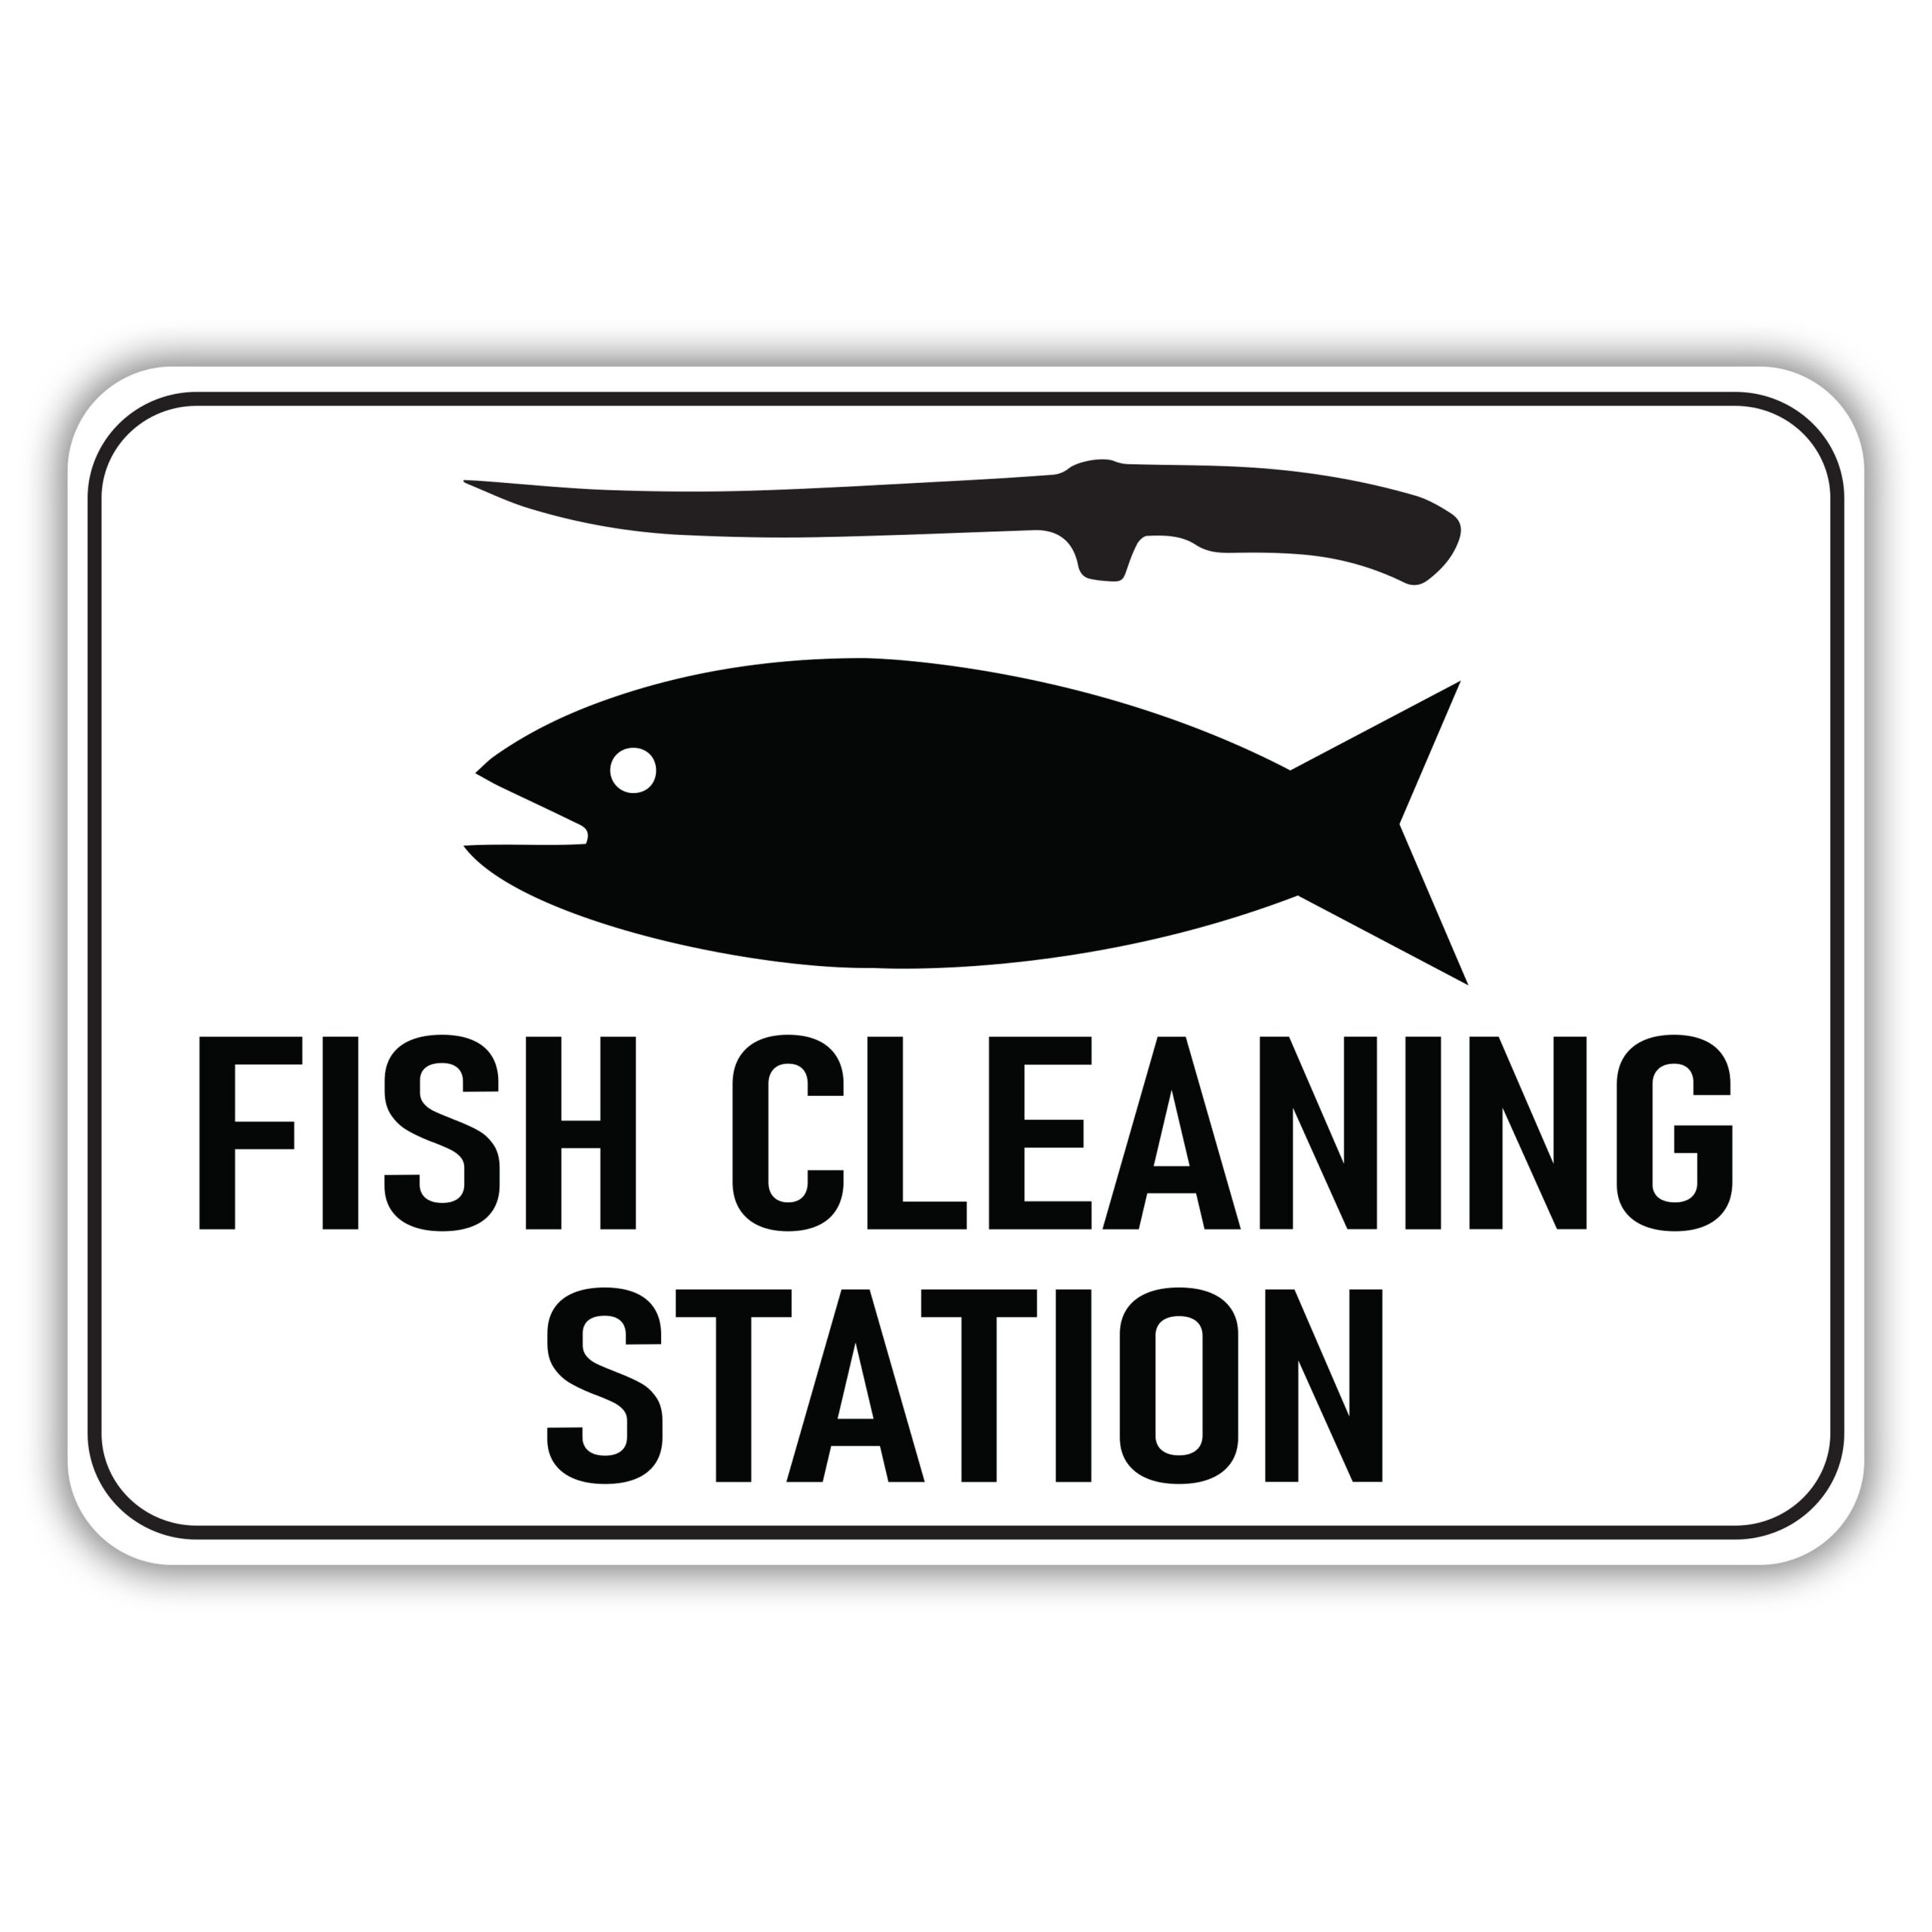 FISH CLEANING STATION